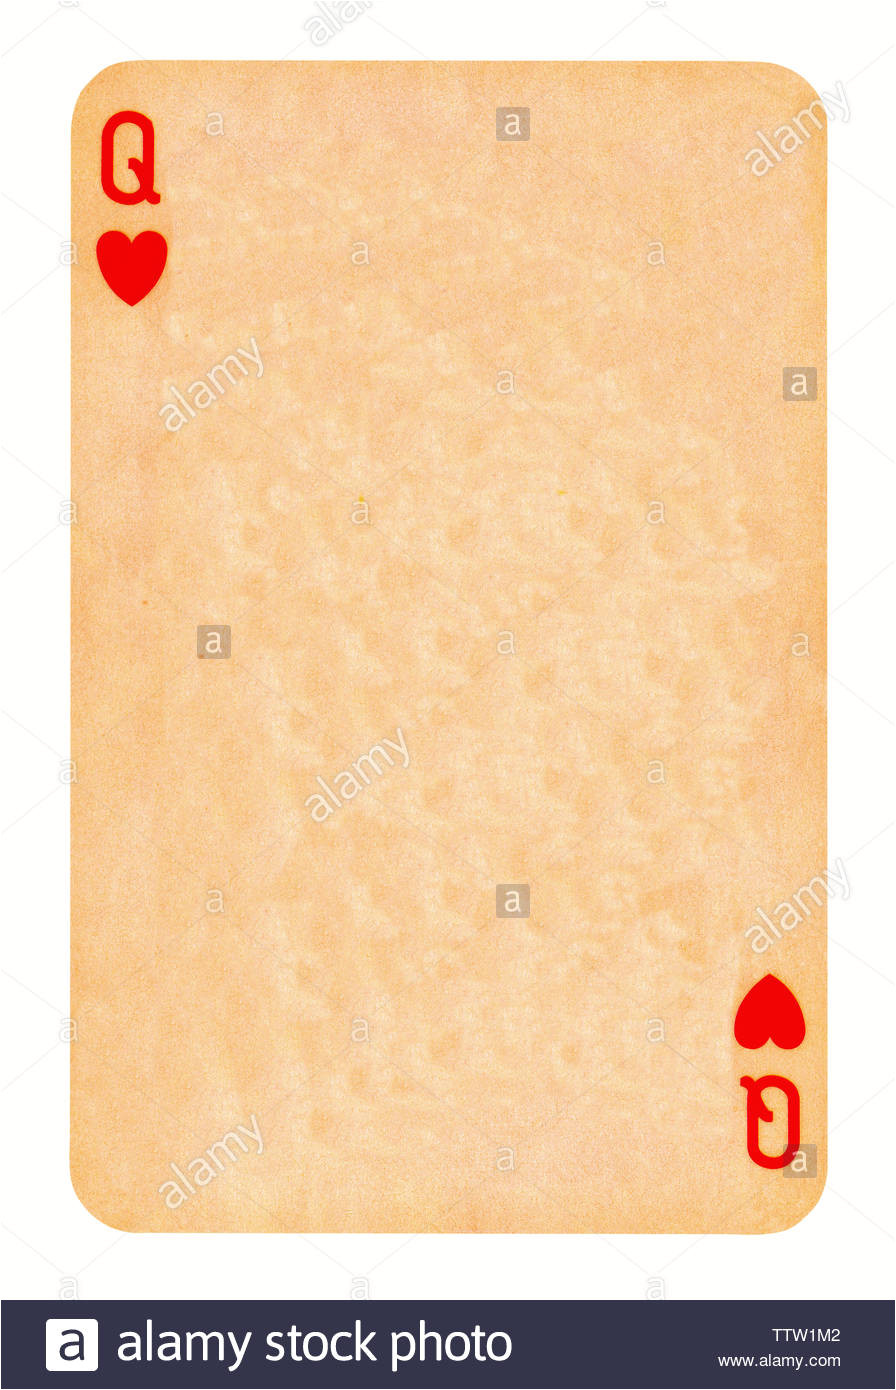 vintage simple background playing card queen of hearts ttw1m2 jpg